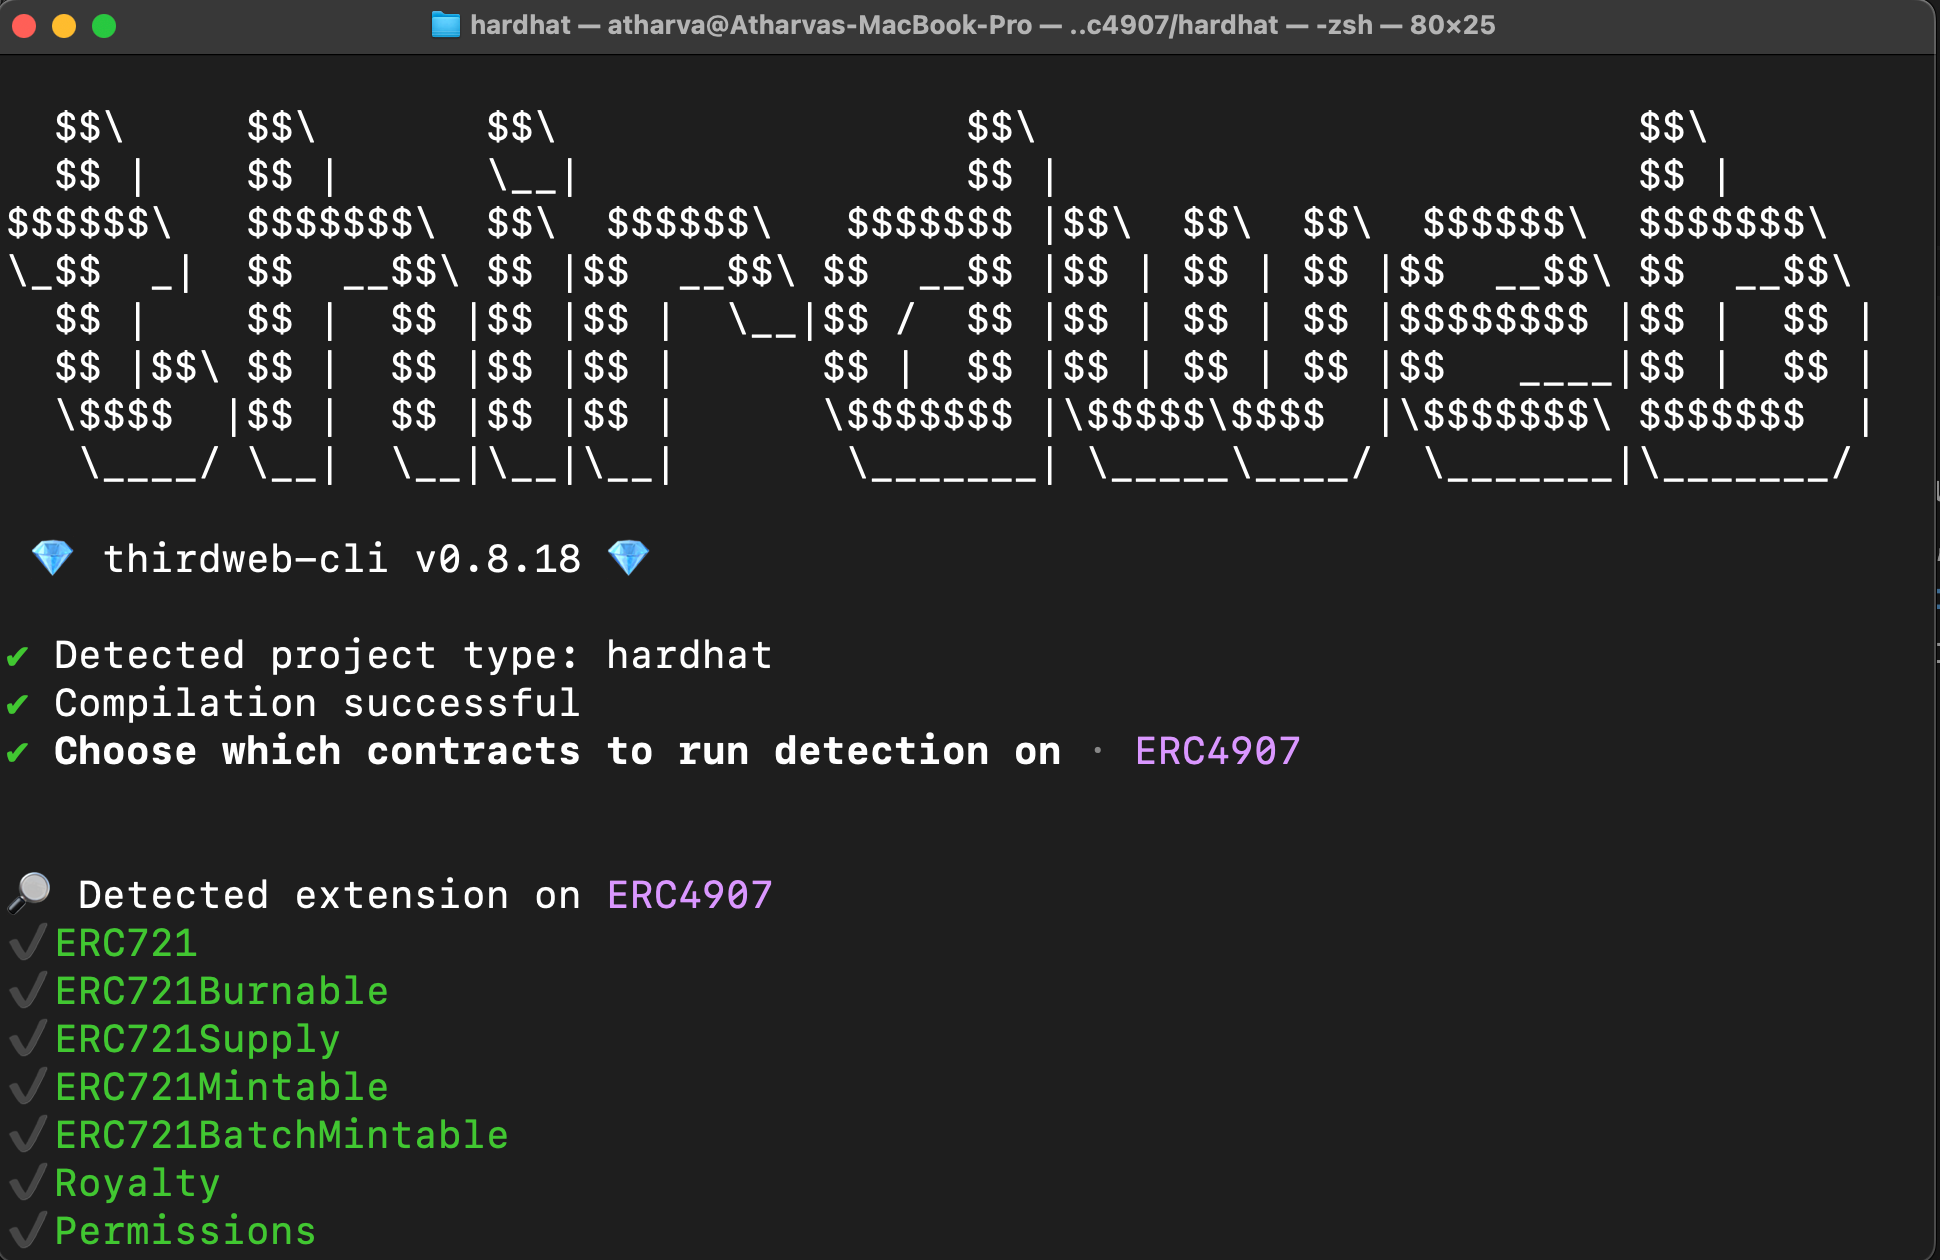 thirdweb CLI compiling the contract and detecting contract extensions